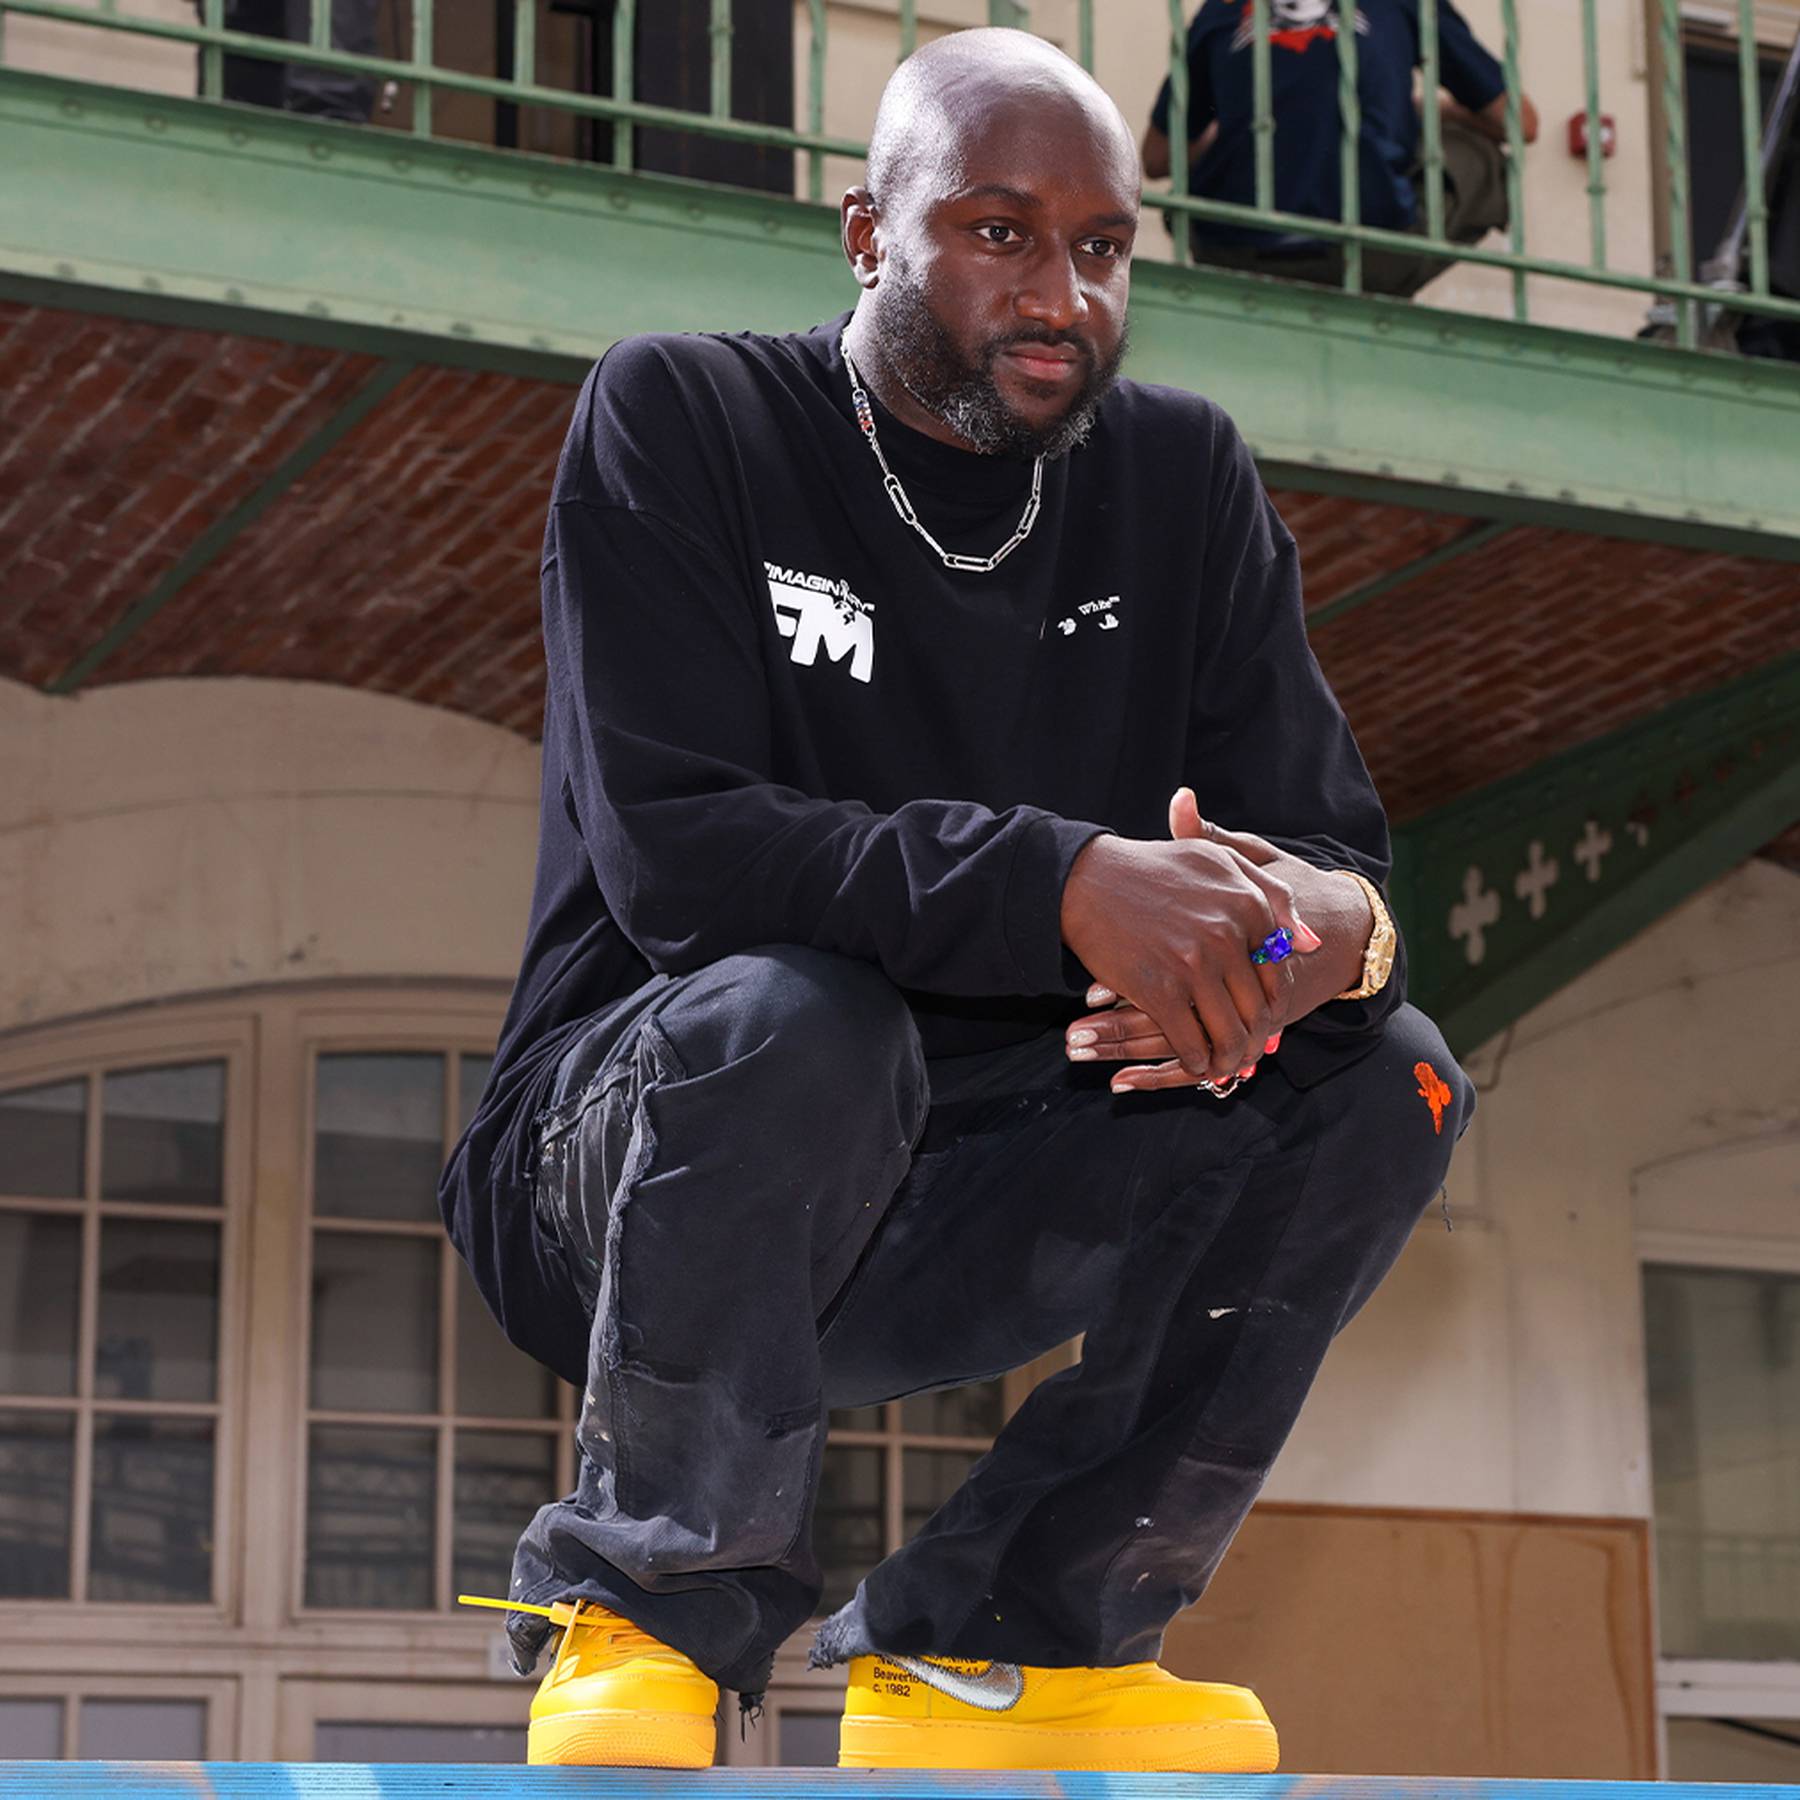 Virgil Abloh: Brooklyn Museum's special exhibition for an iconic artist